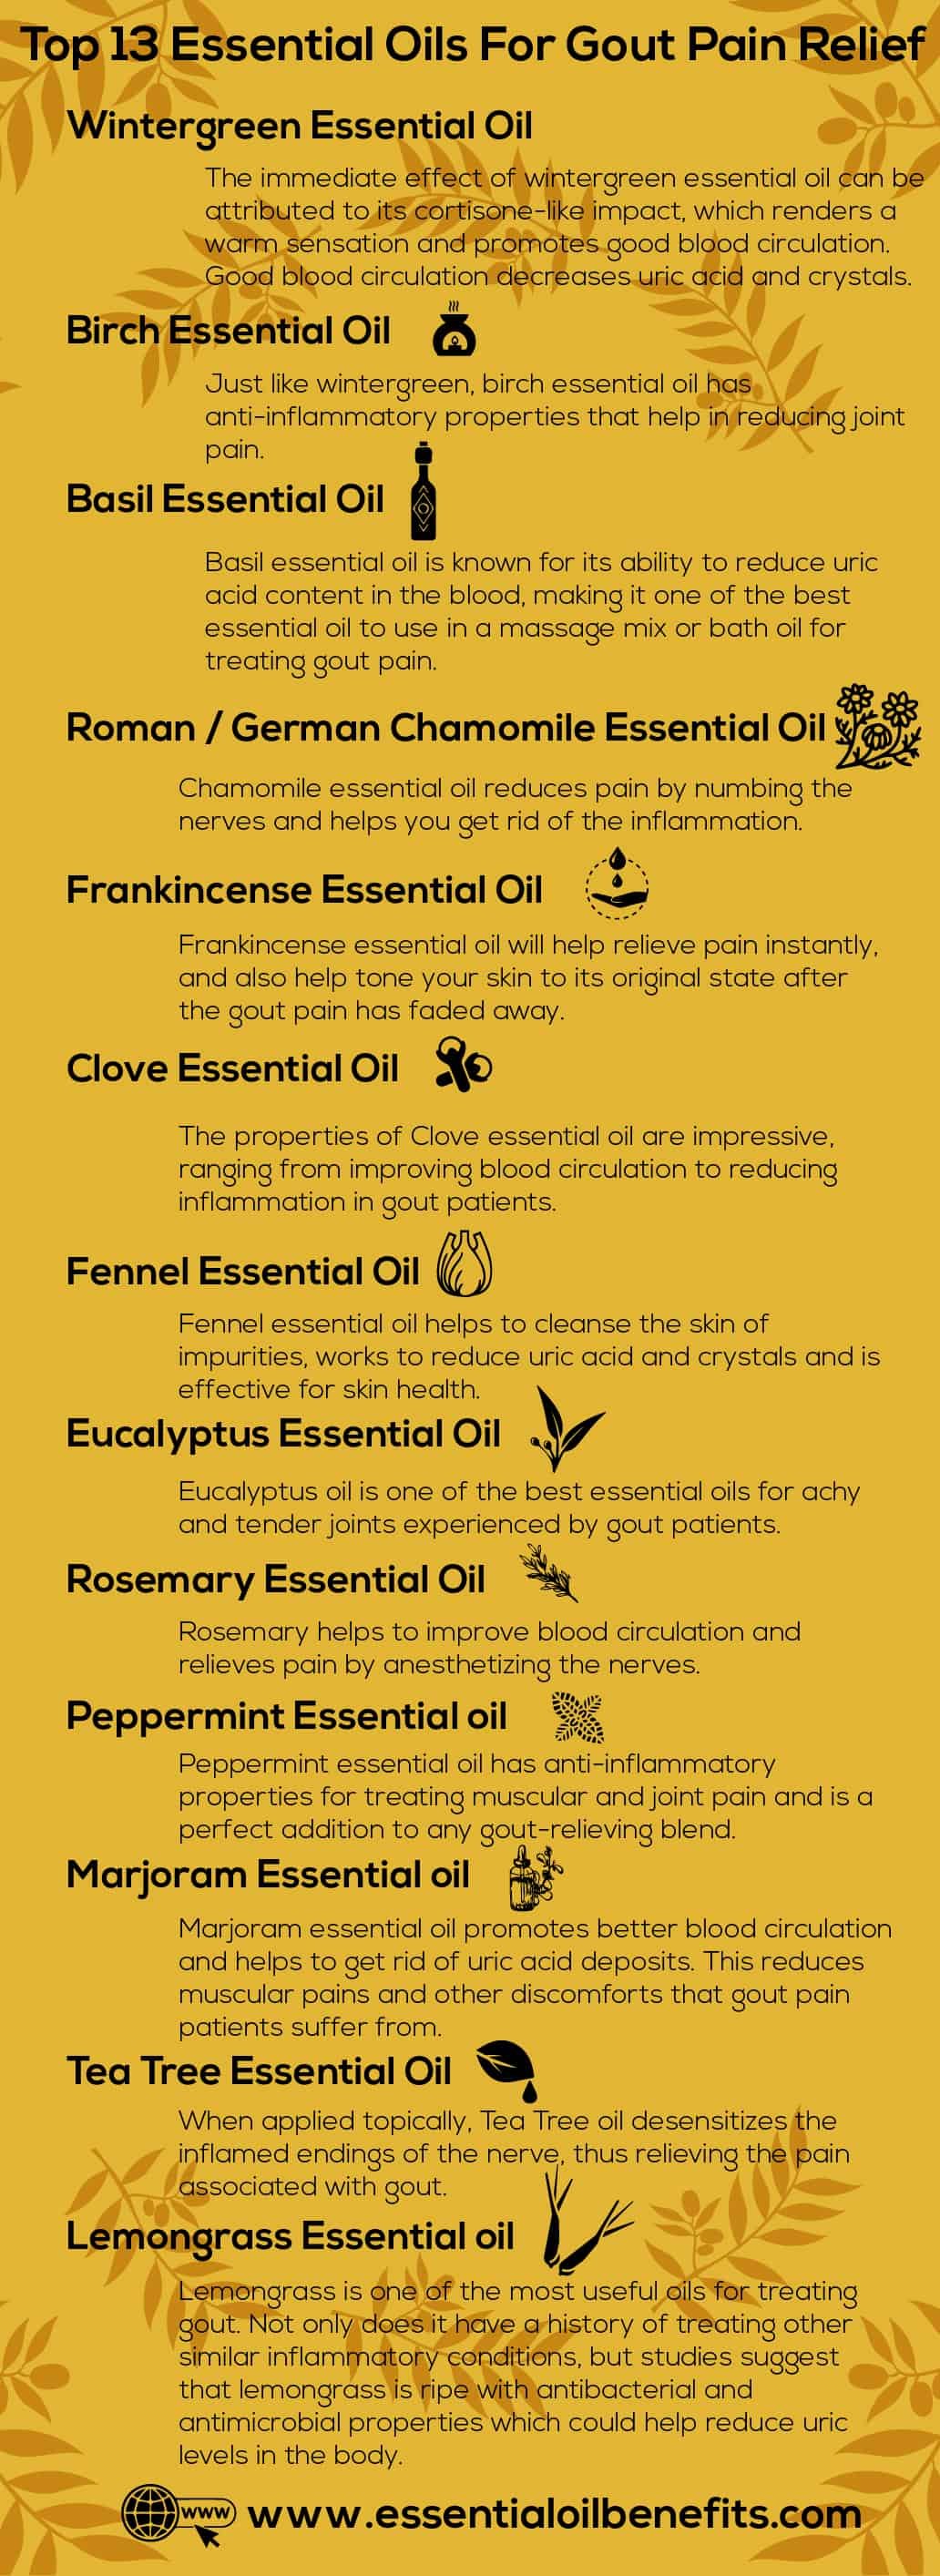 Essential Oils for Gout Pain Relief